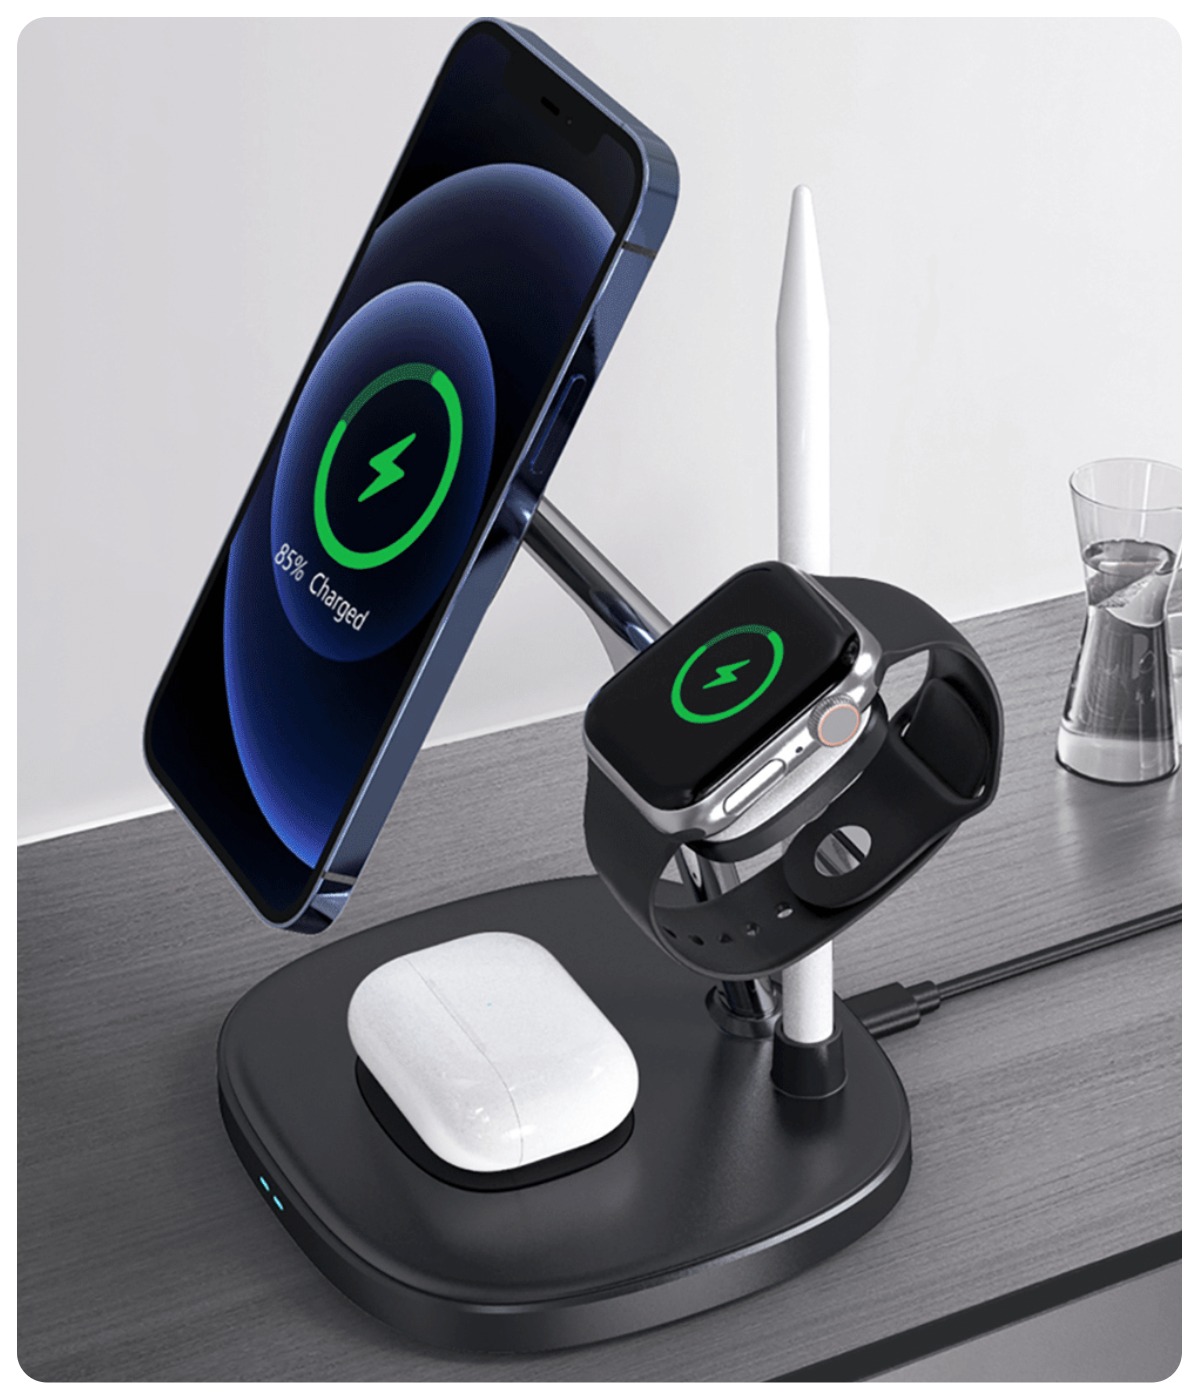 Wiwu-Power-Air-4in1-Wireless-Charger-M8-02